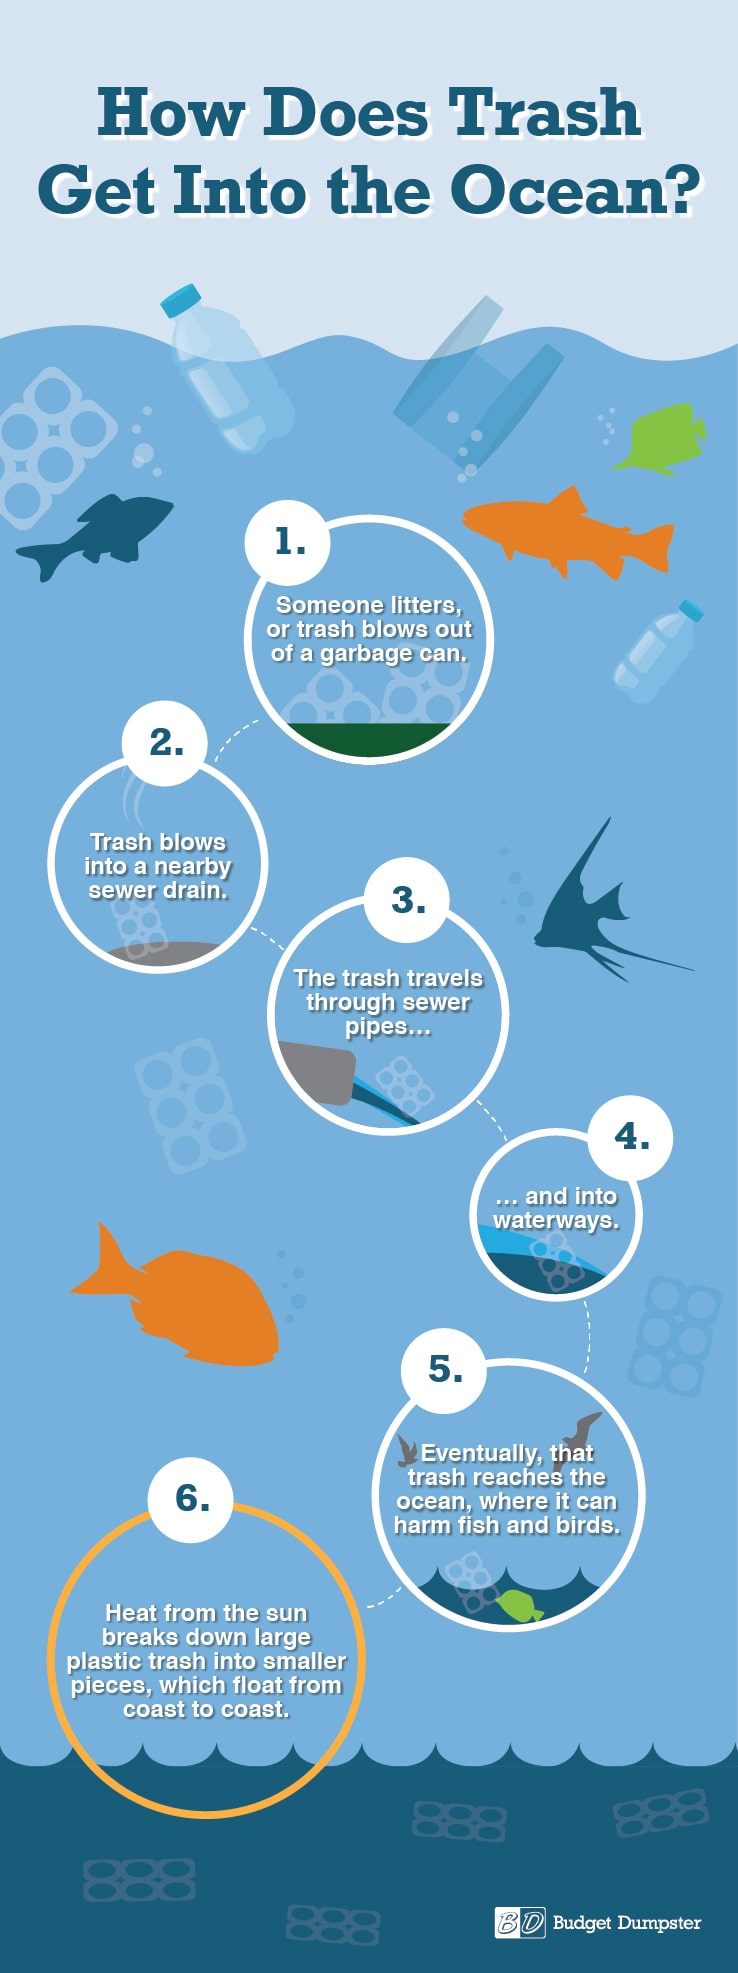 Infographic Showing How Trash Gets Into the Ocean